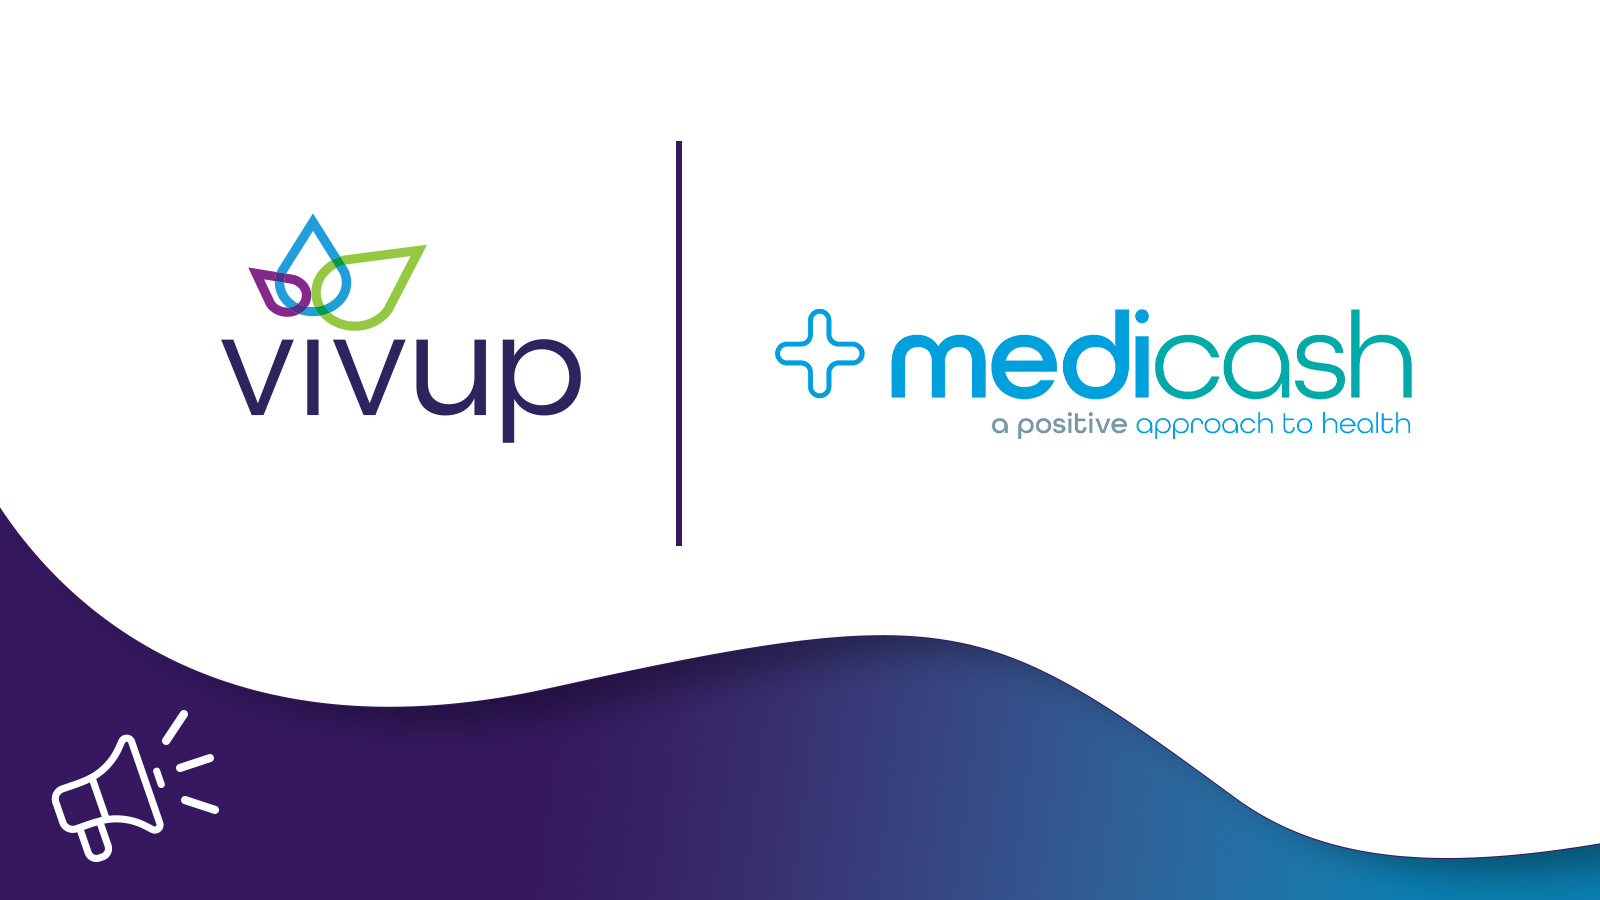 Vivup and medicash logos on a partnership announcement